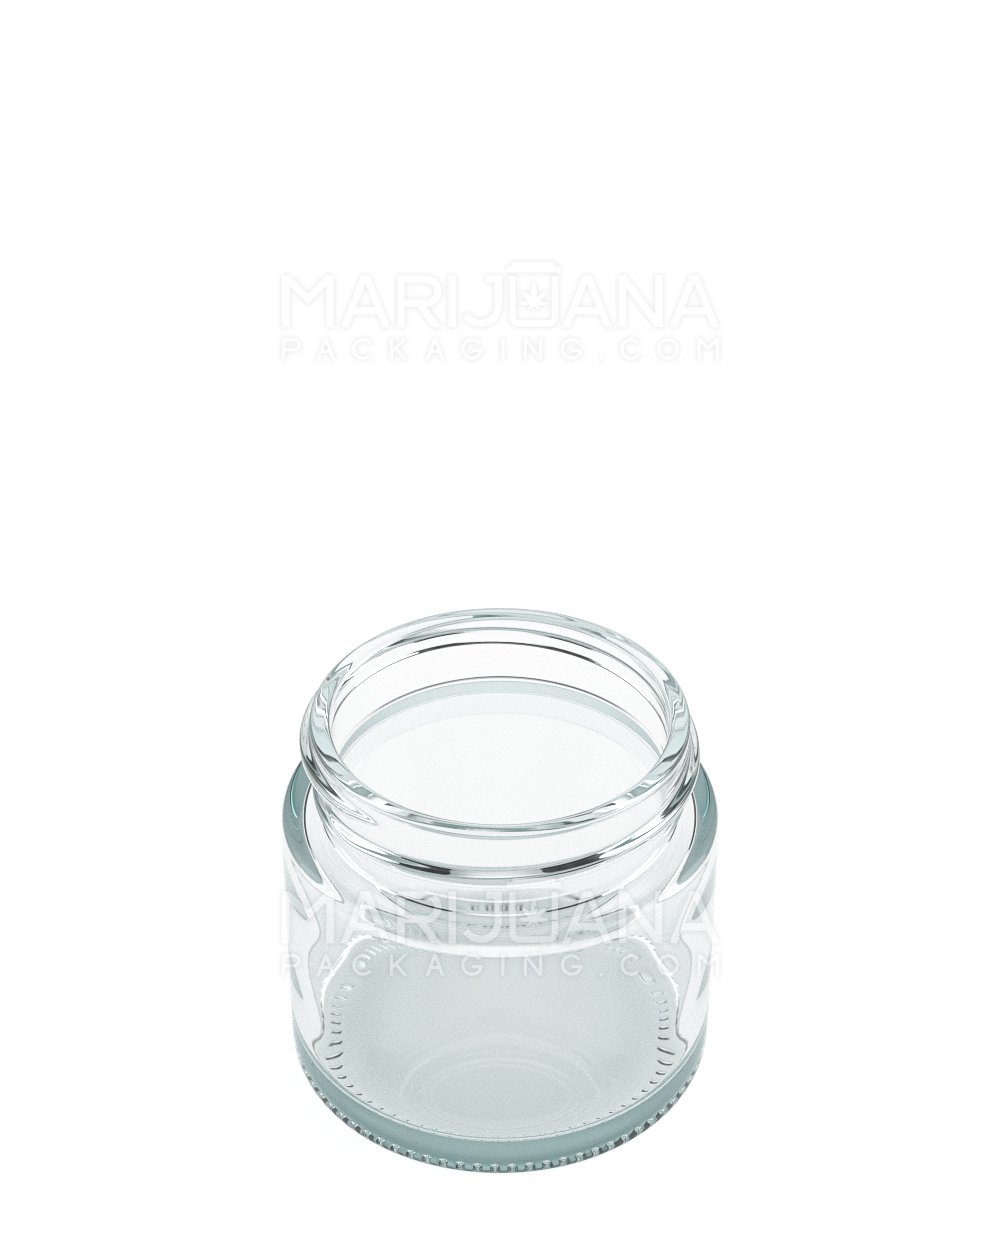 Straight Sided Clear Glass Jars | 50mm - 2oz - 200 Count - 3